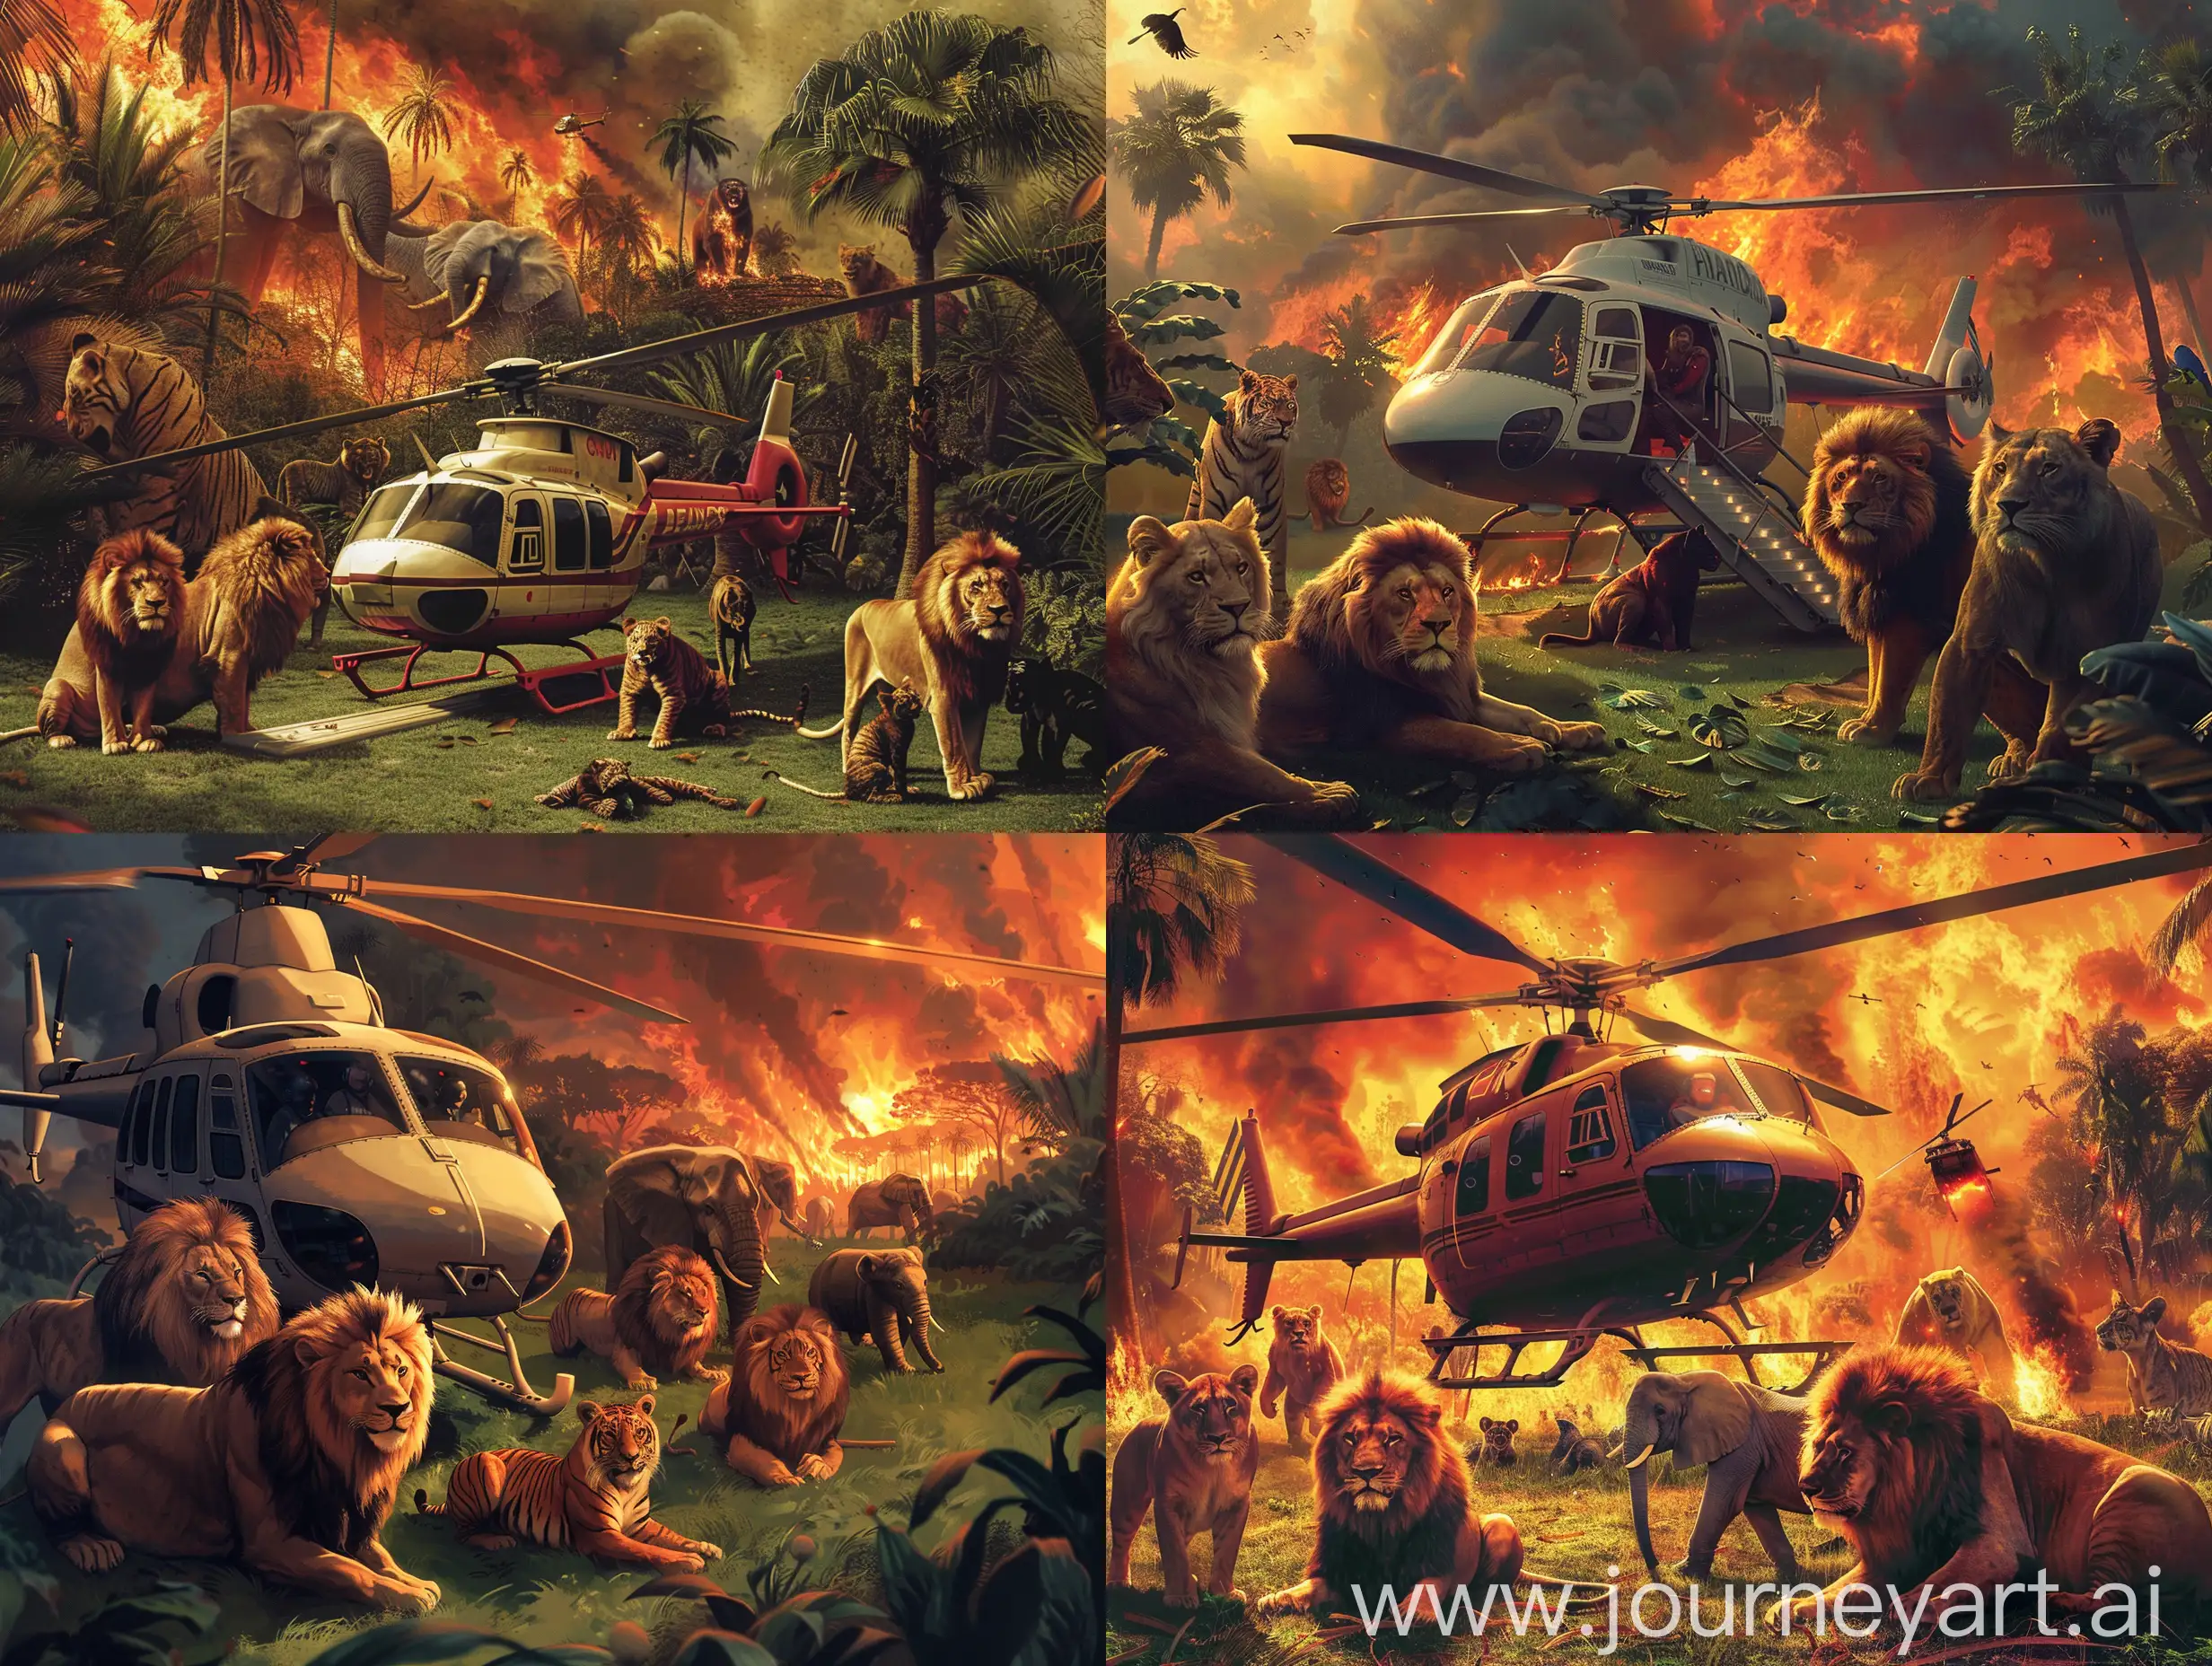 Jungle-Animals-Awaiting-Rescue-Amidst-Wildfire